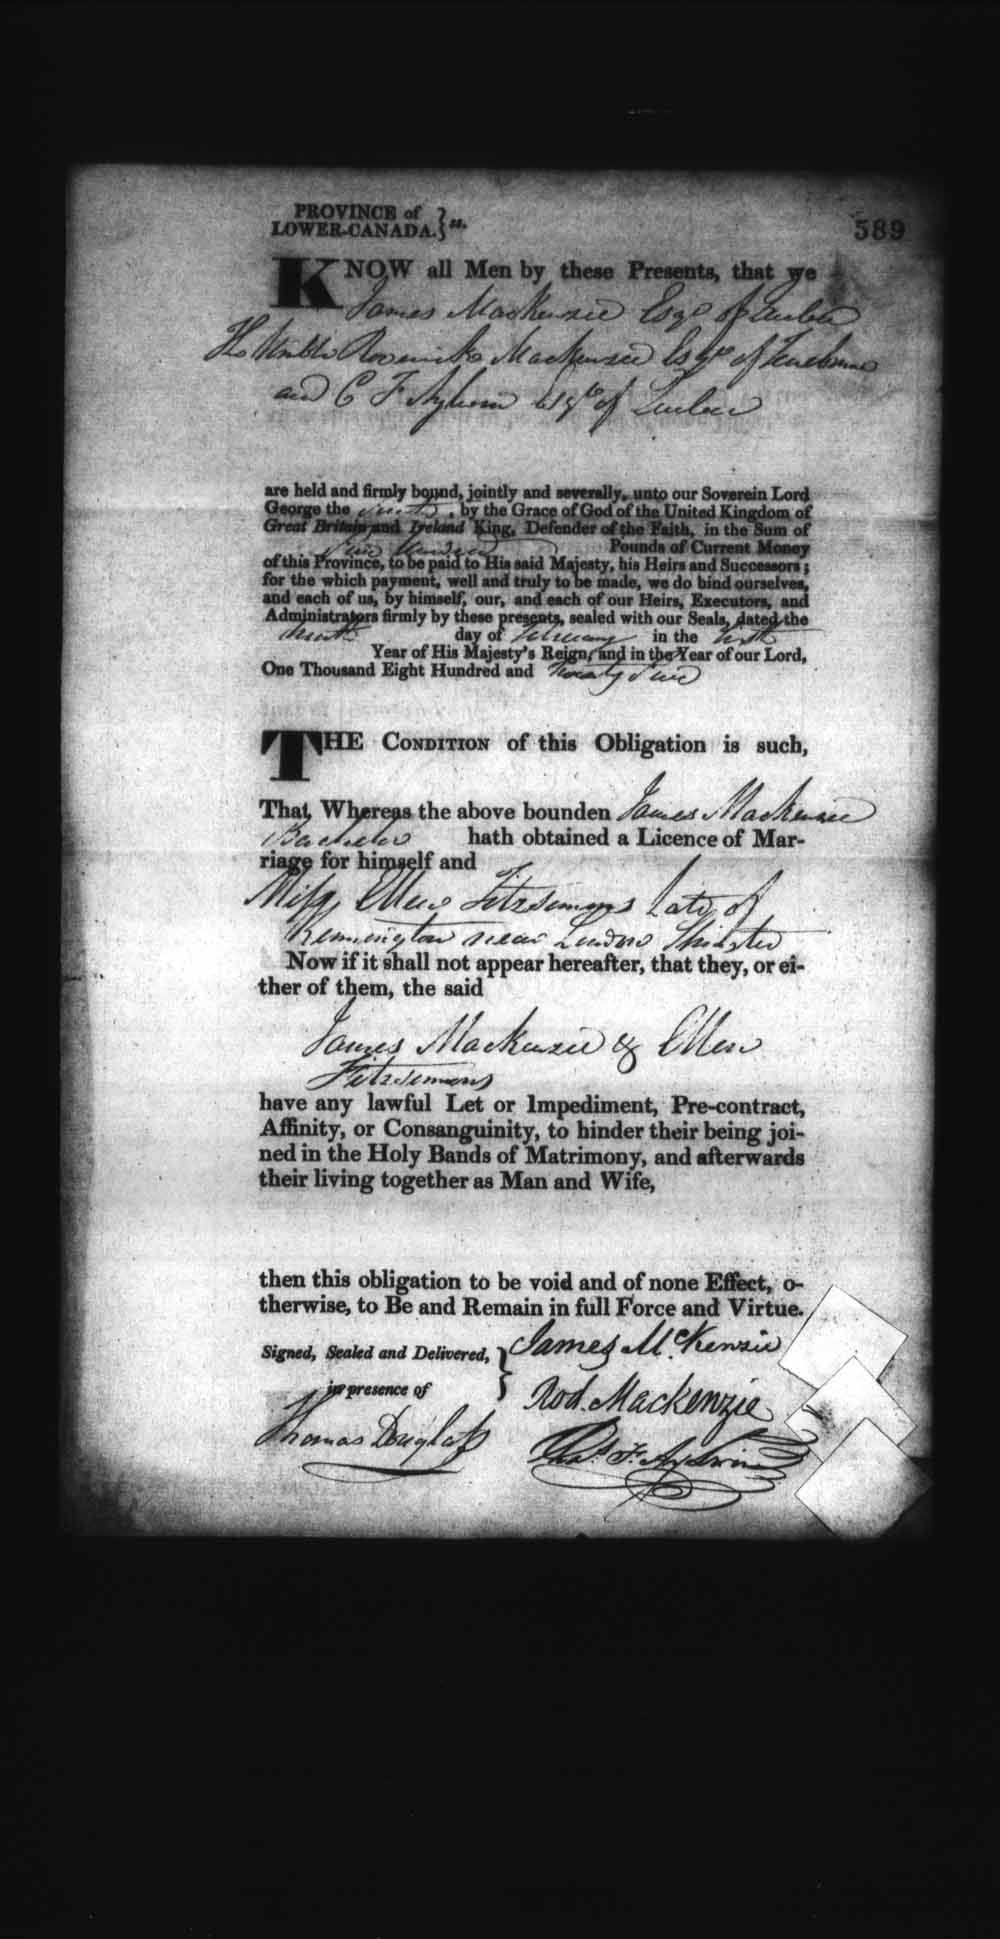 Digitized page of Upper and Lower Canada Marriage Bonds (1779-1865) for Image No.: e008236595